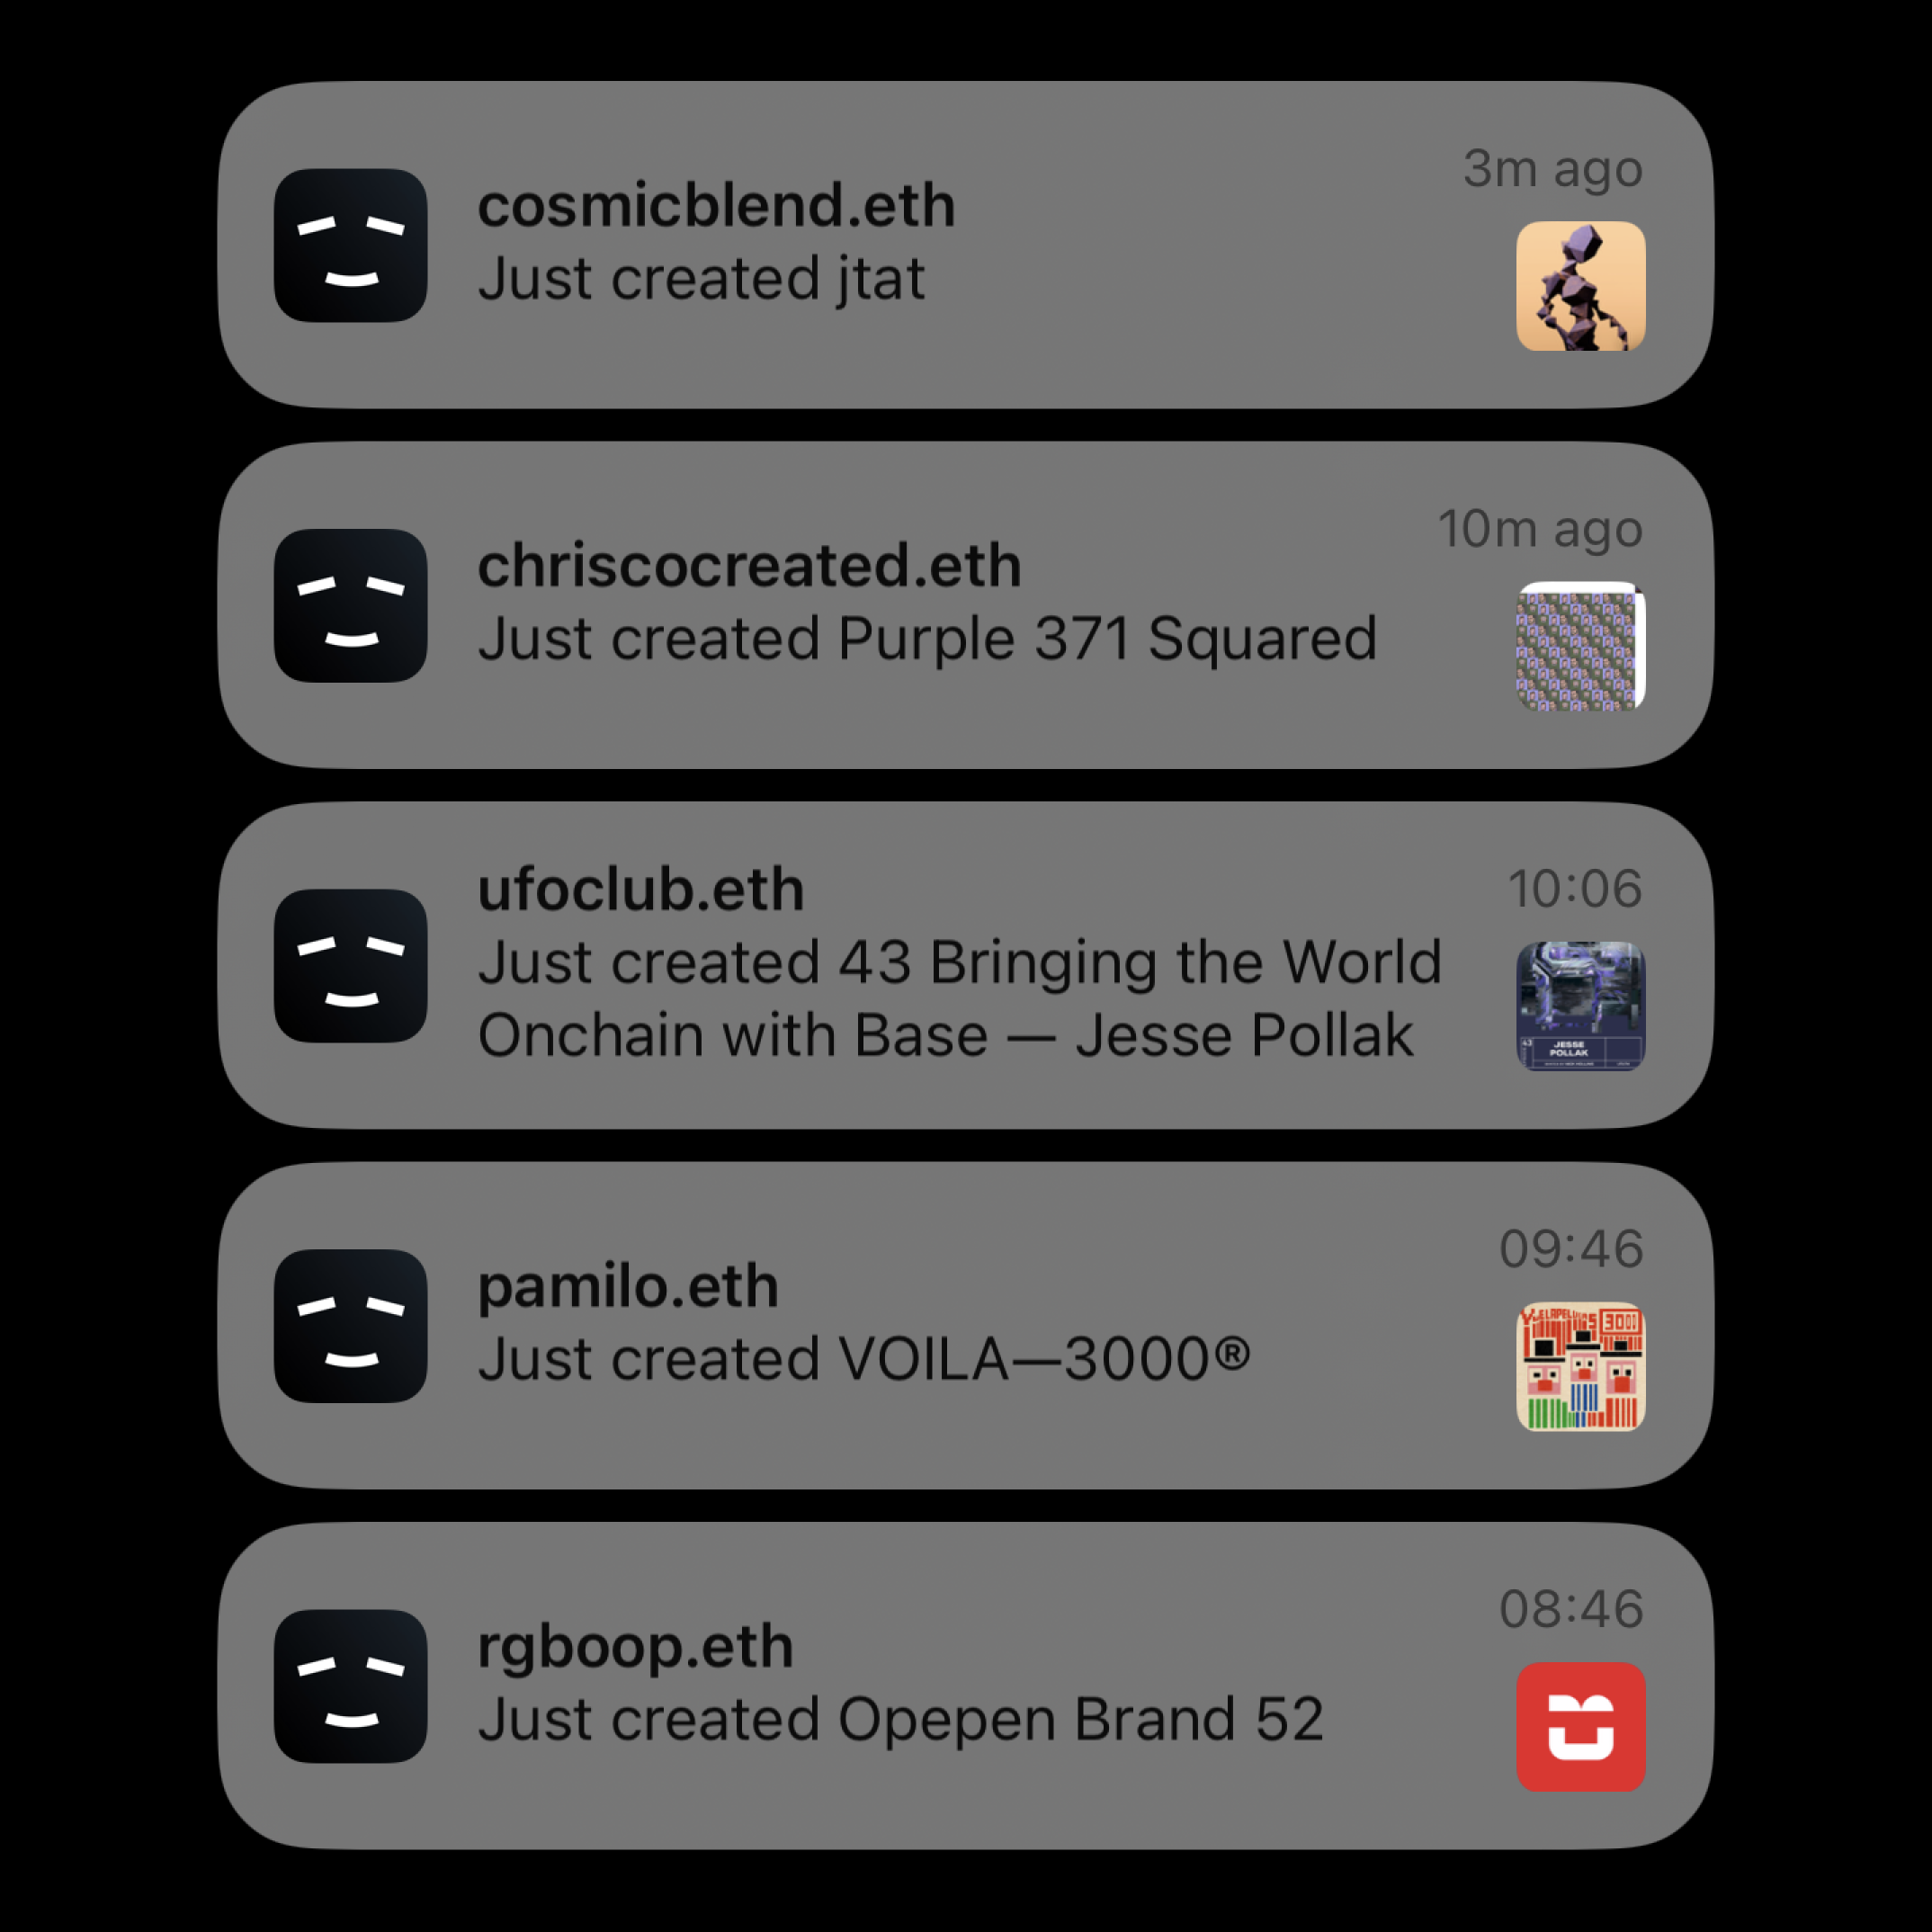 Notifications for creations